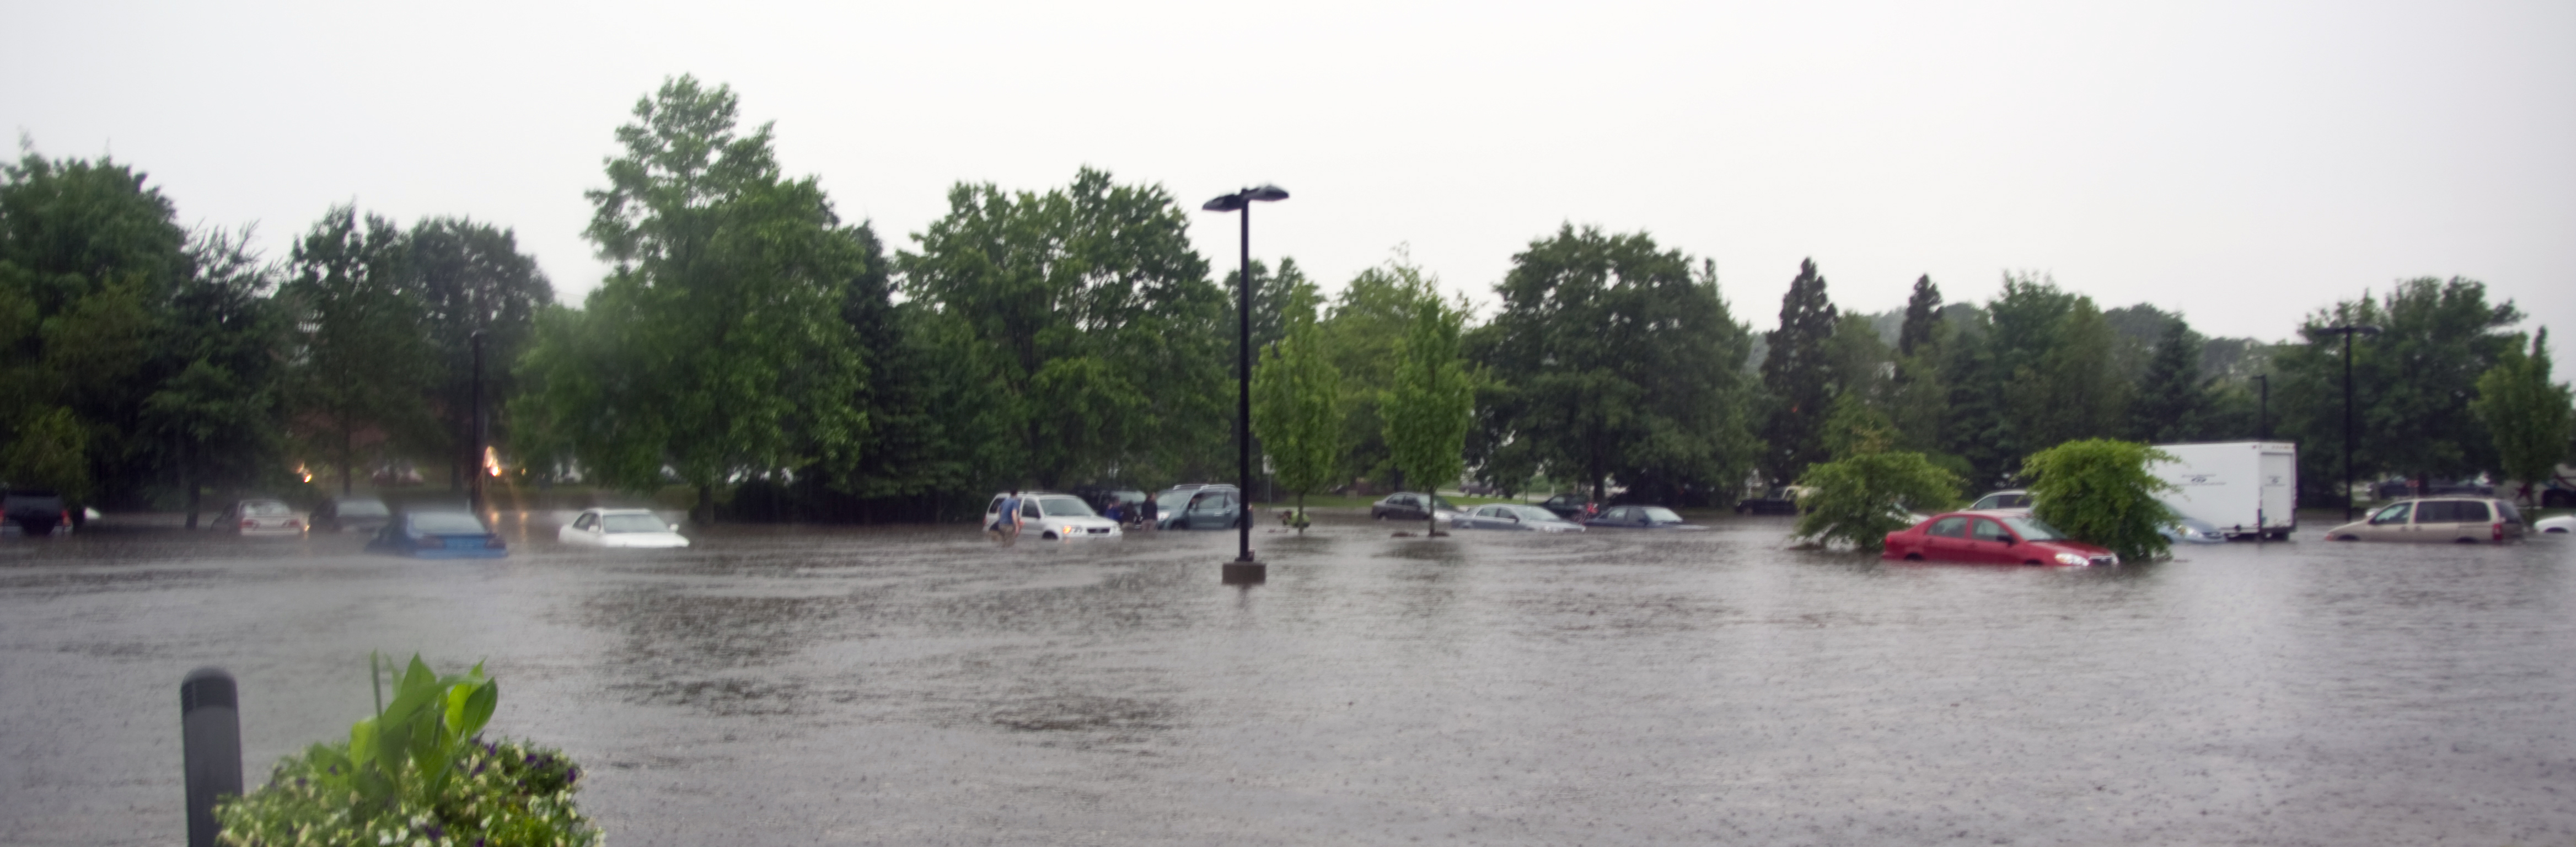 Flooded parking lot with cars submerged in water. 